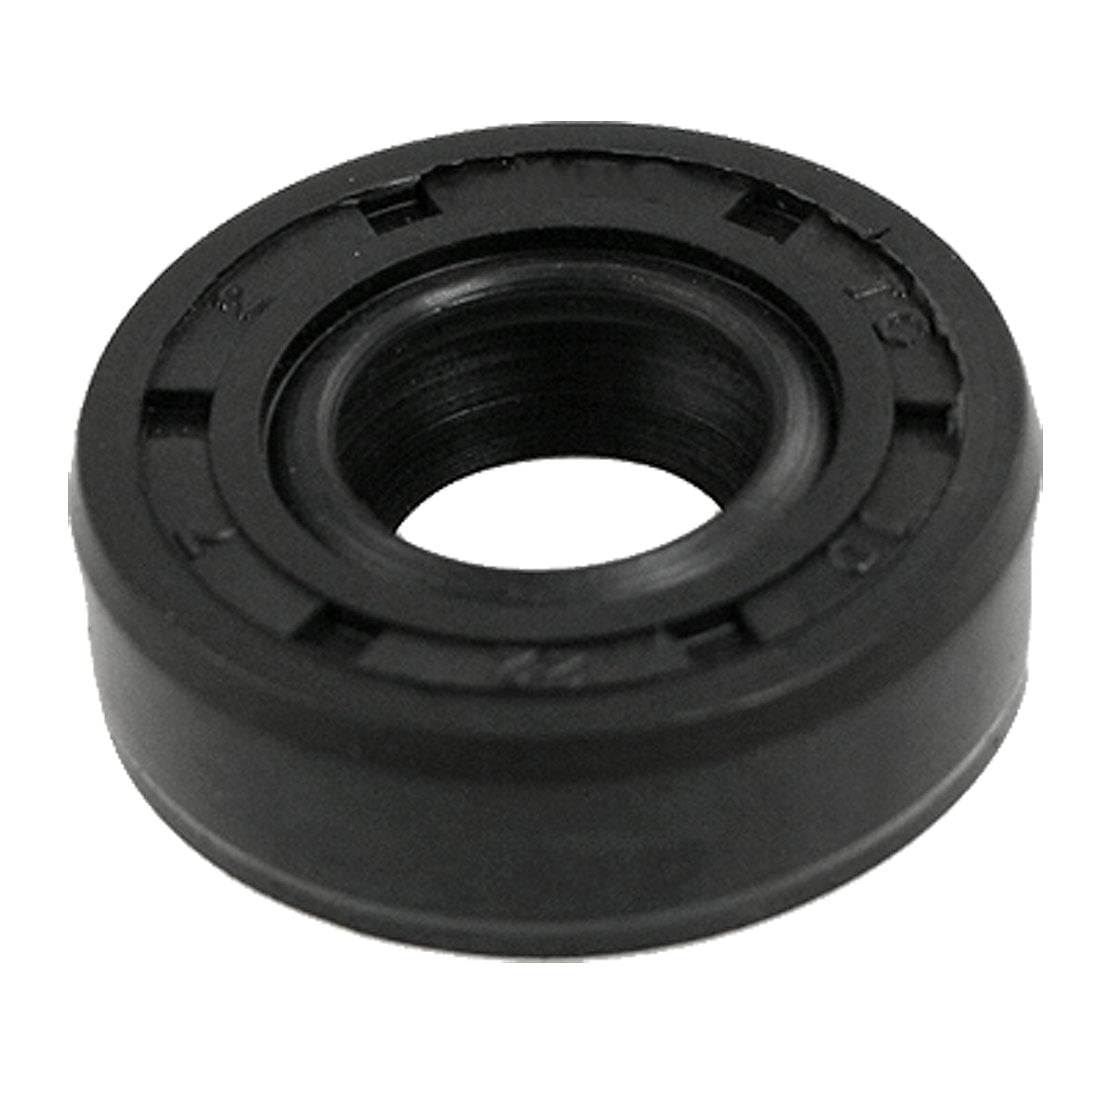 Metric Oil Shaft Seal 22 x 36 x 7mm Double Lip  Price for 1 pc 